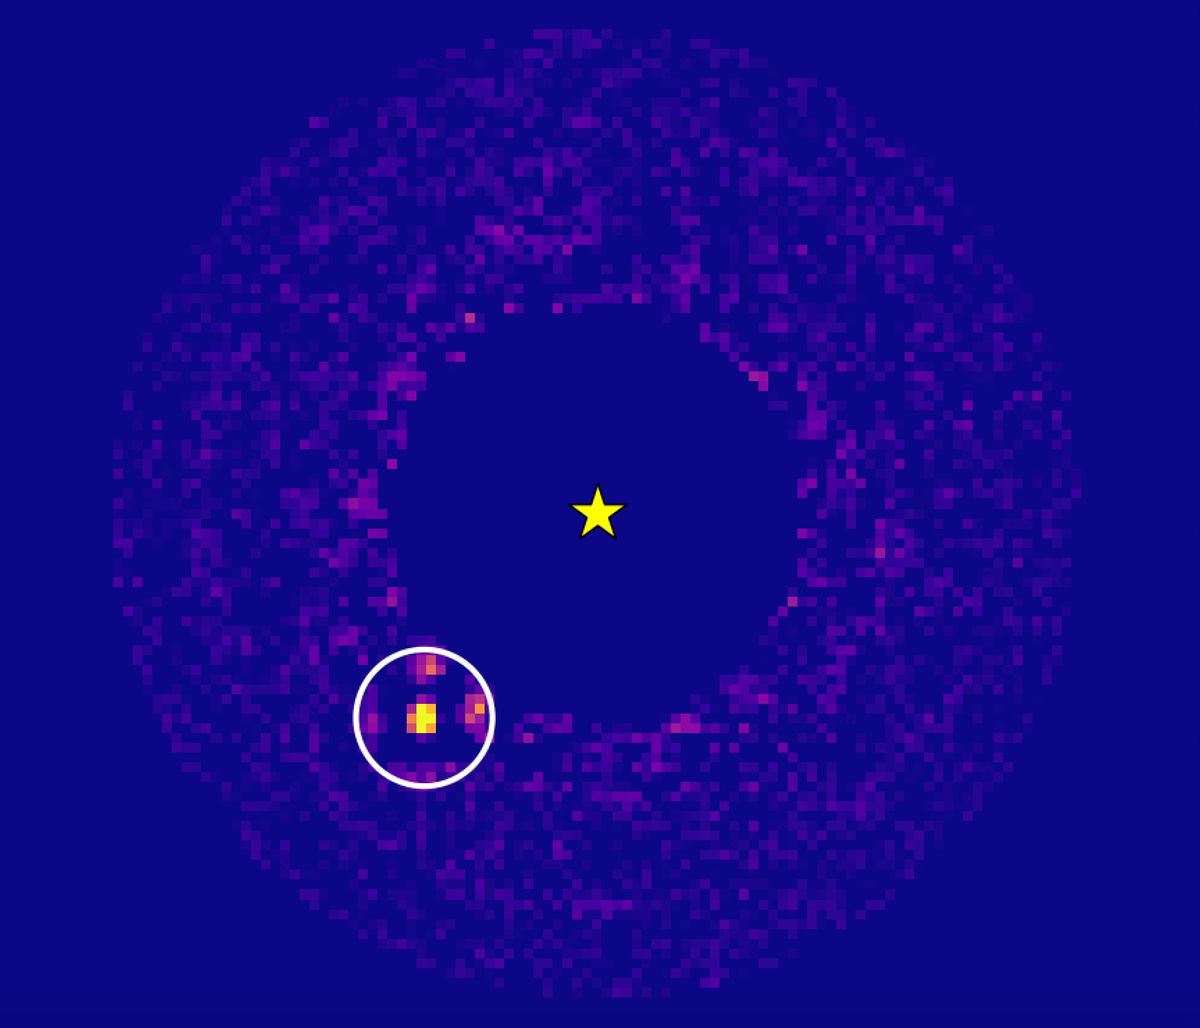 Giant exoplanet imaged live thanks to star mapping data (photos)